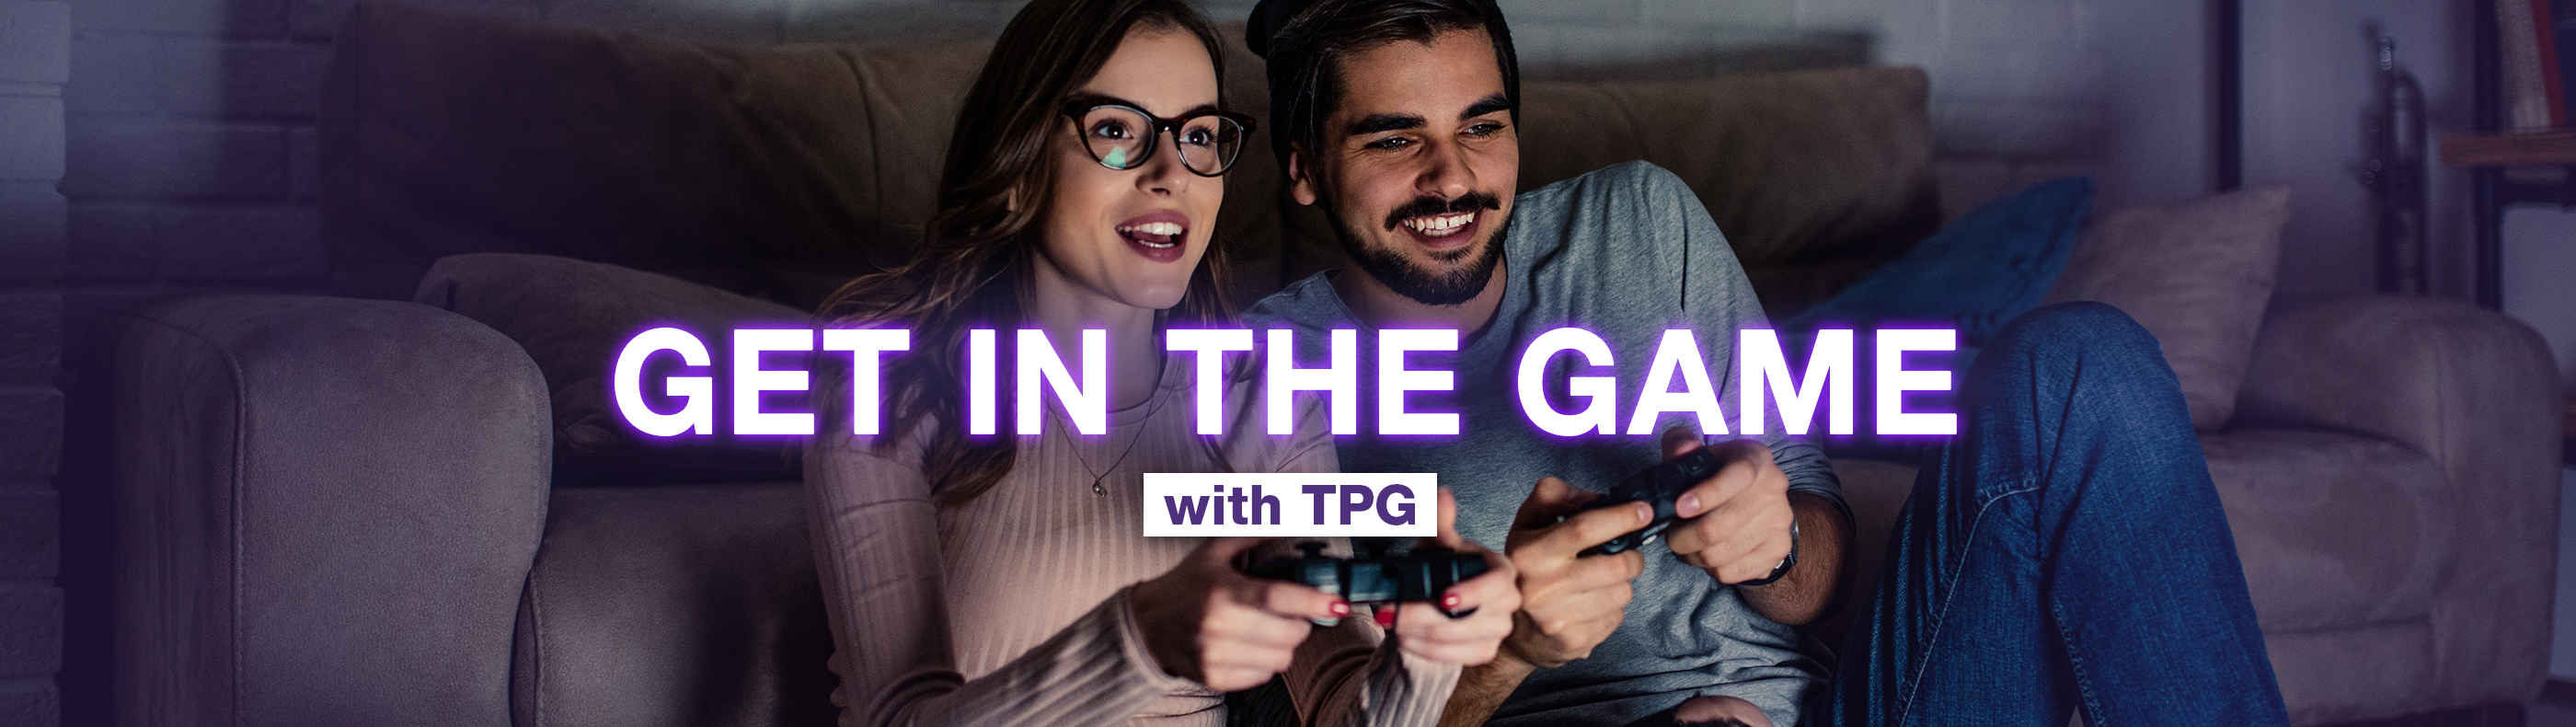 Gaming with TPG